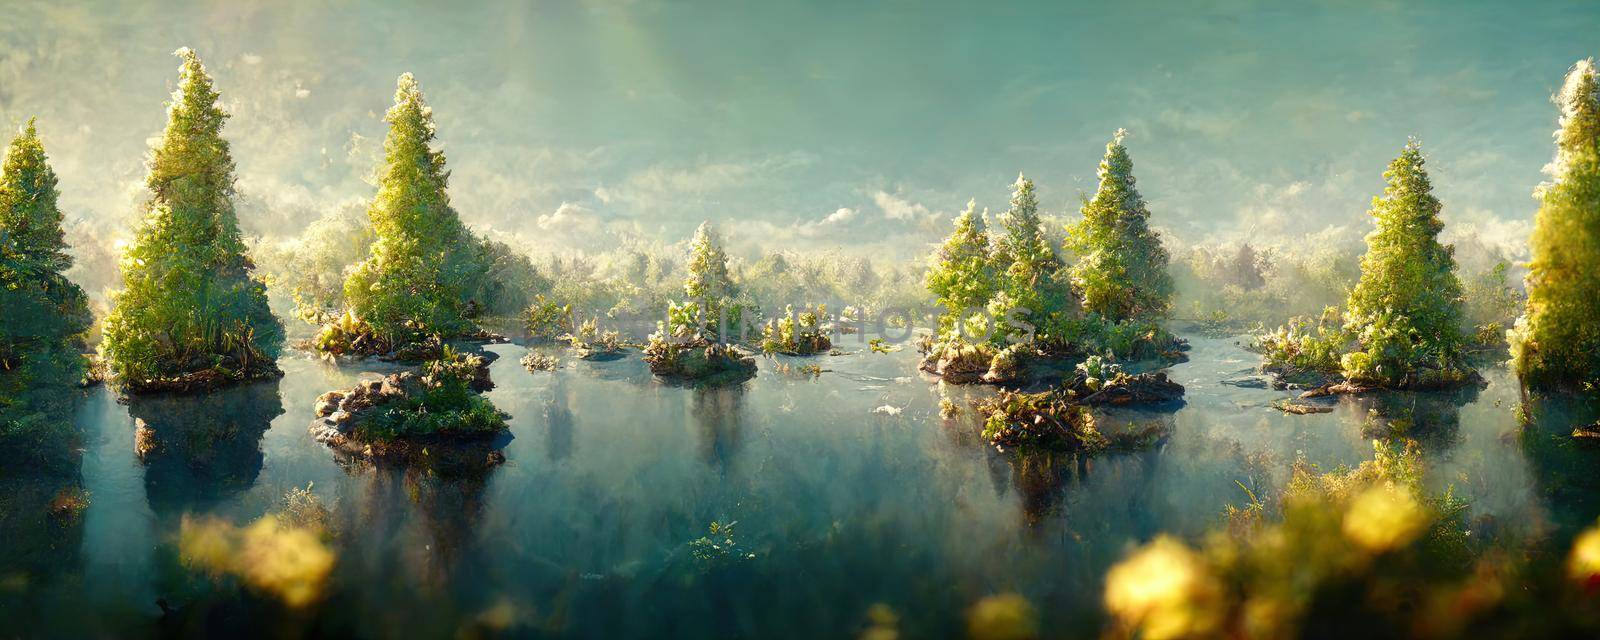 Magic flooded fantasy forest with big lake green trees.